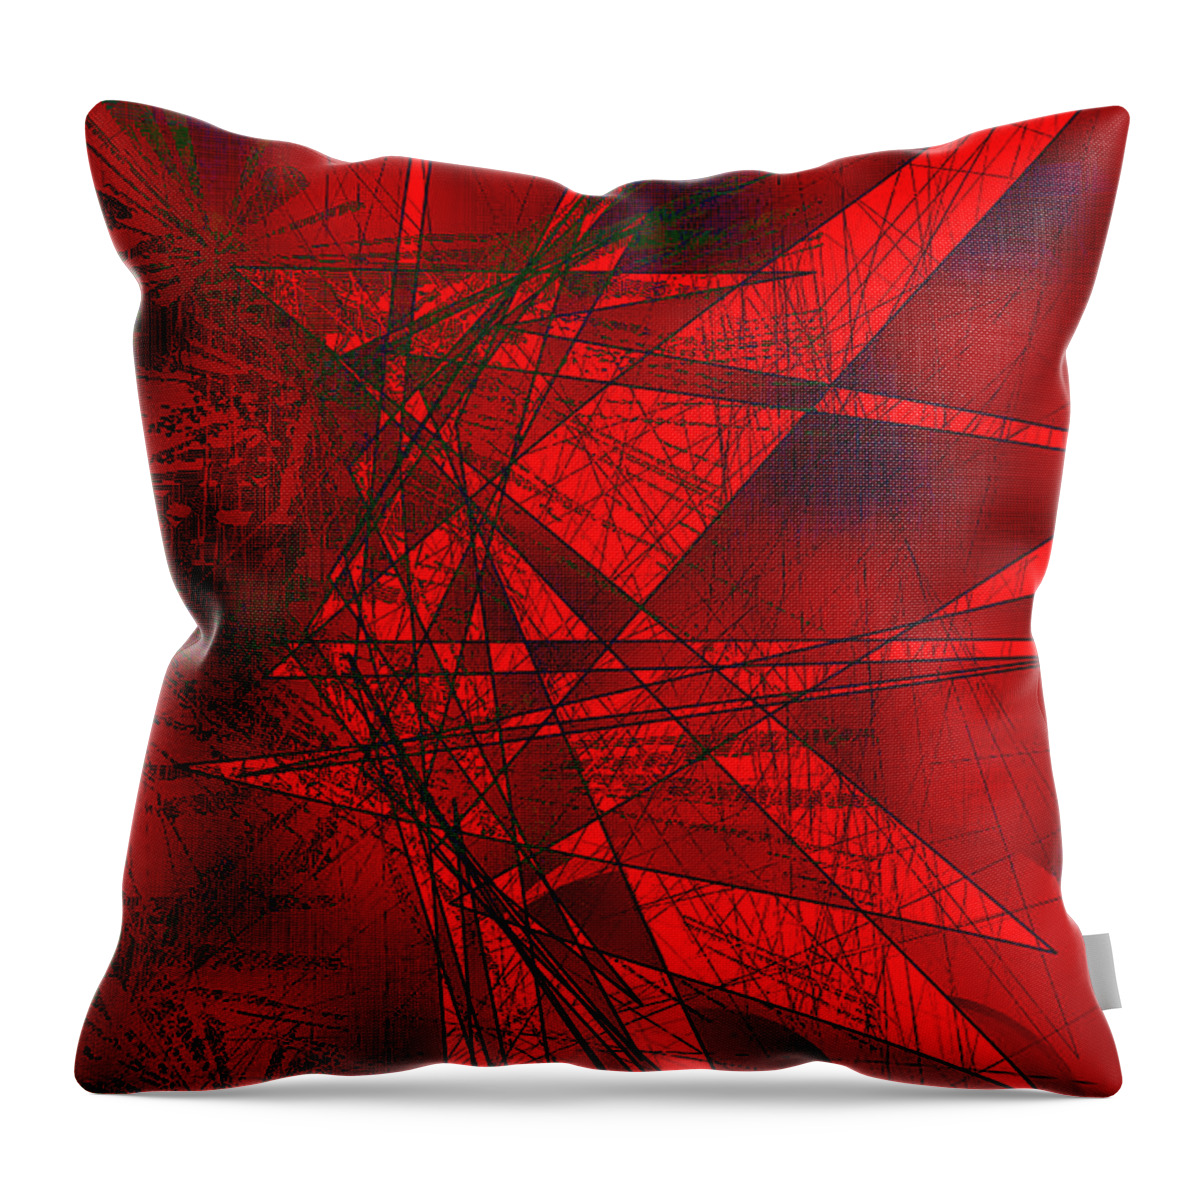 Red Throw Pillow featuring the digital art Red Geometry by Dee Flouton